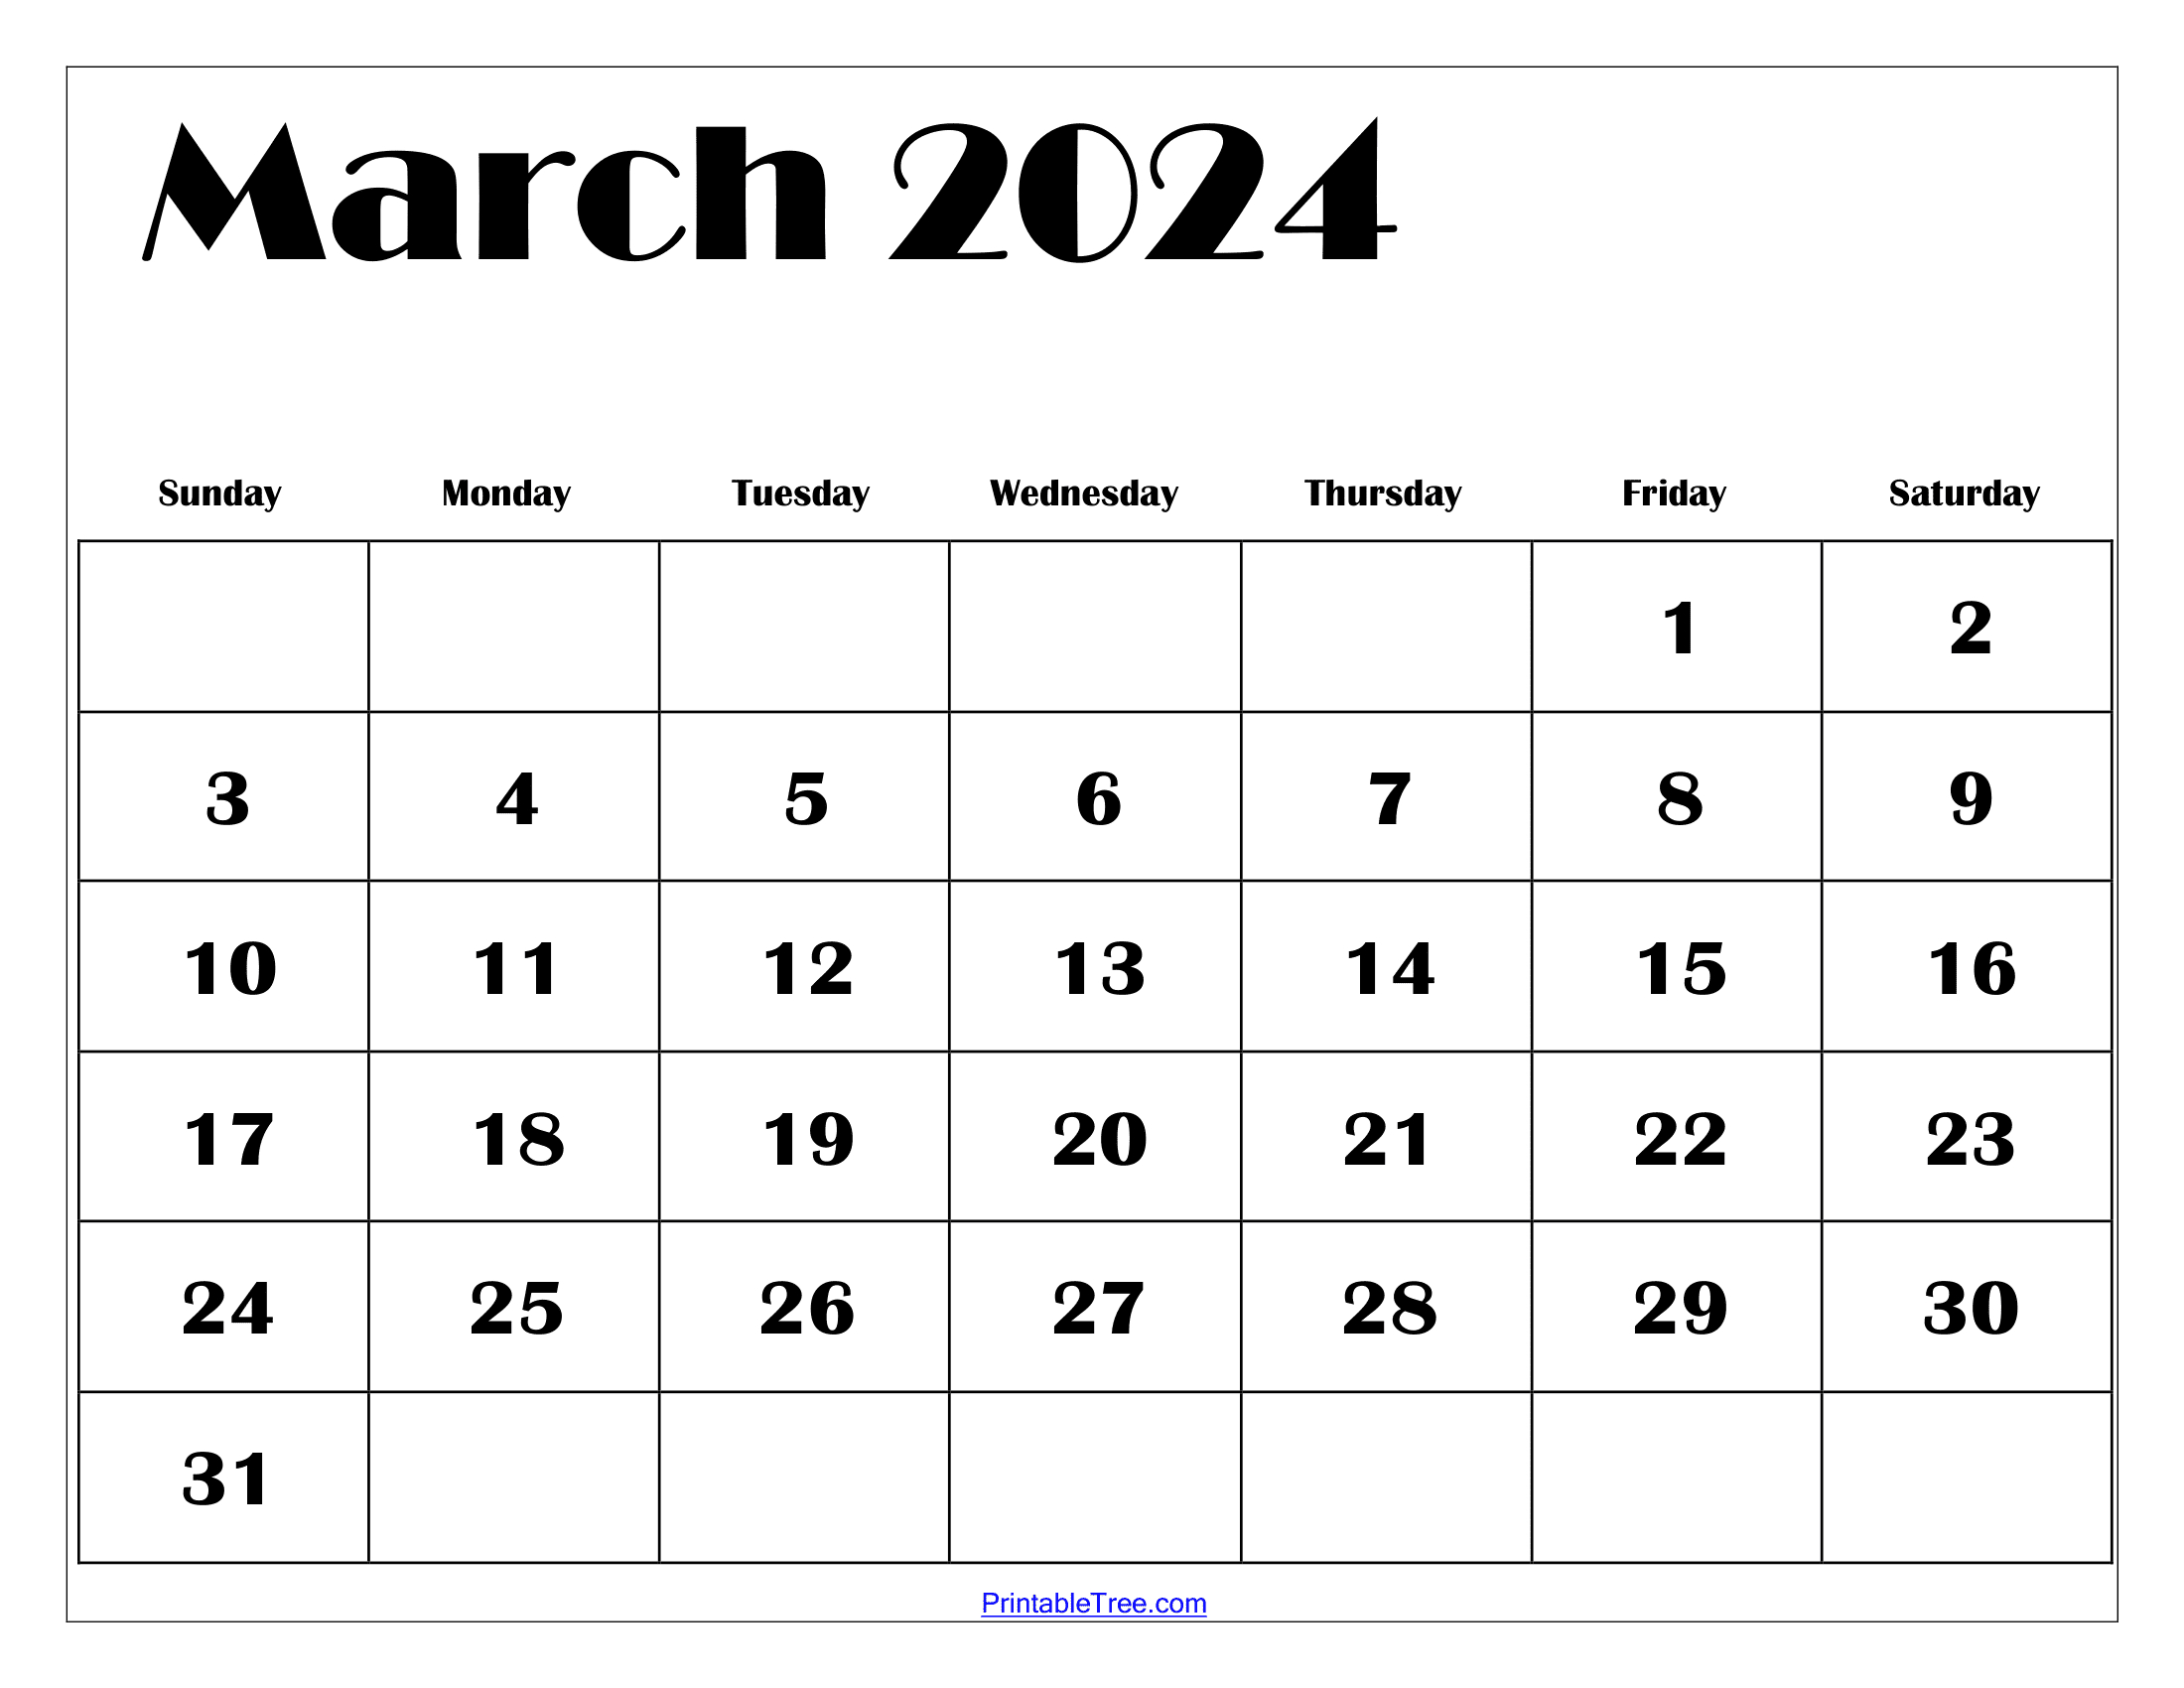 March 2024 Calendar Printable Pdf With Holidays Template Free | March 2024 Calendar with Holidays Printable